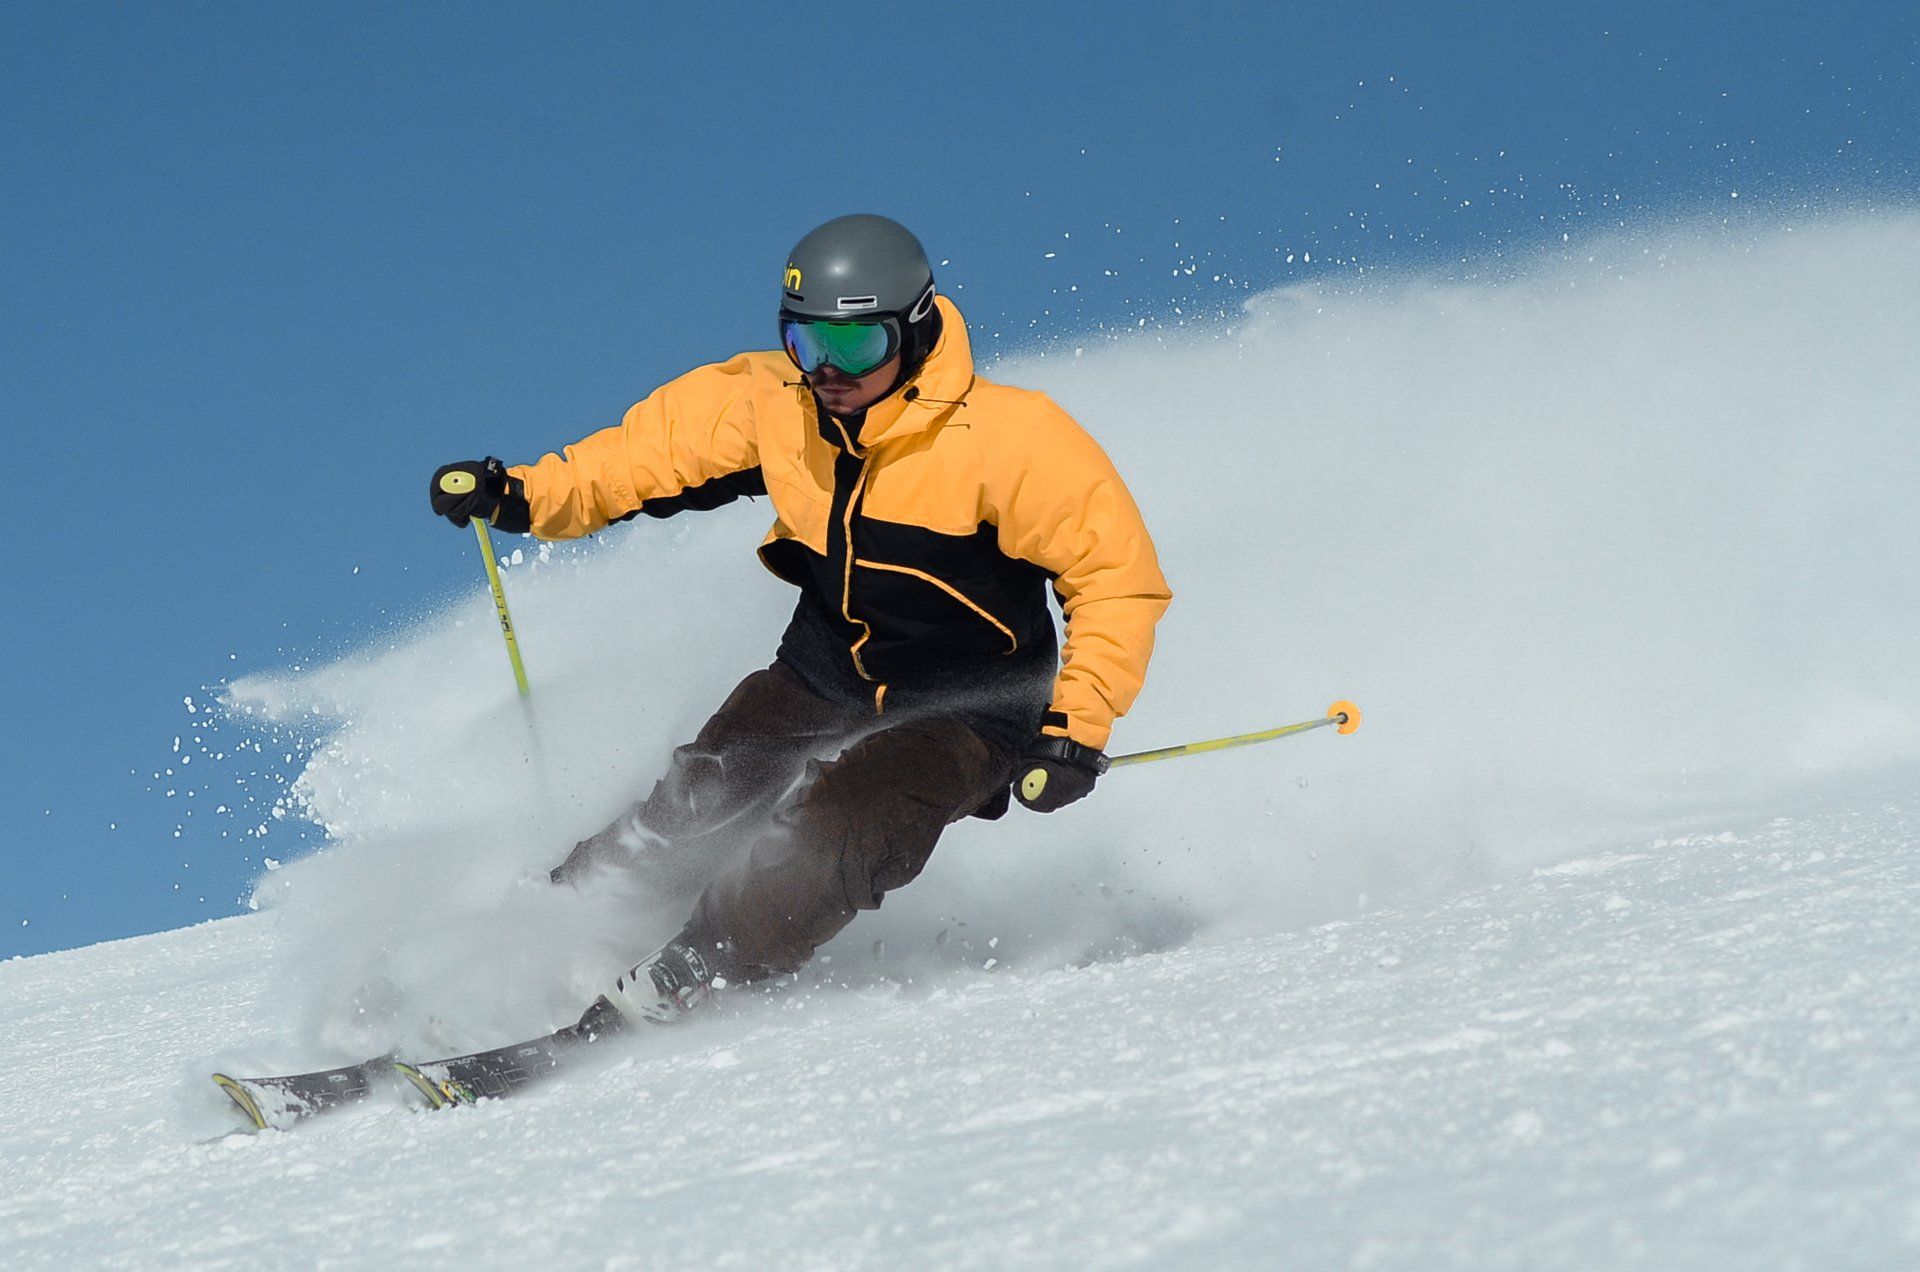 A man in a bright yellow snow jacket downhill alpine skiing